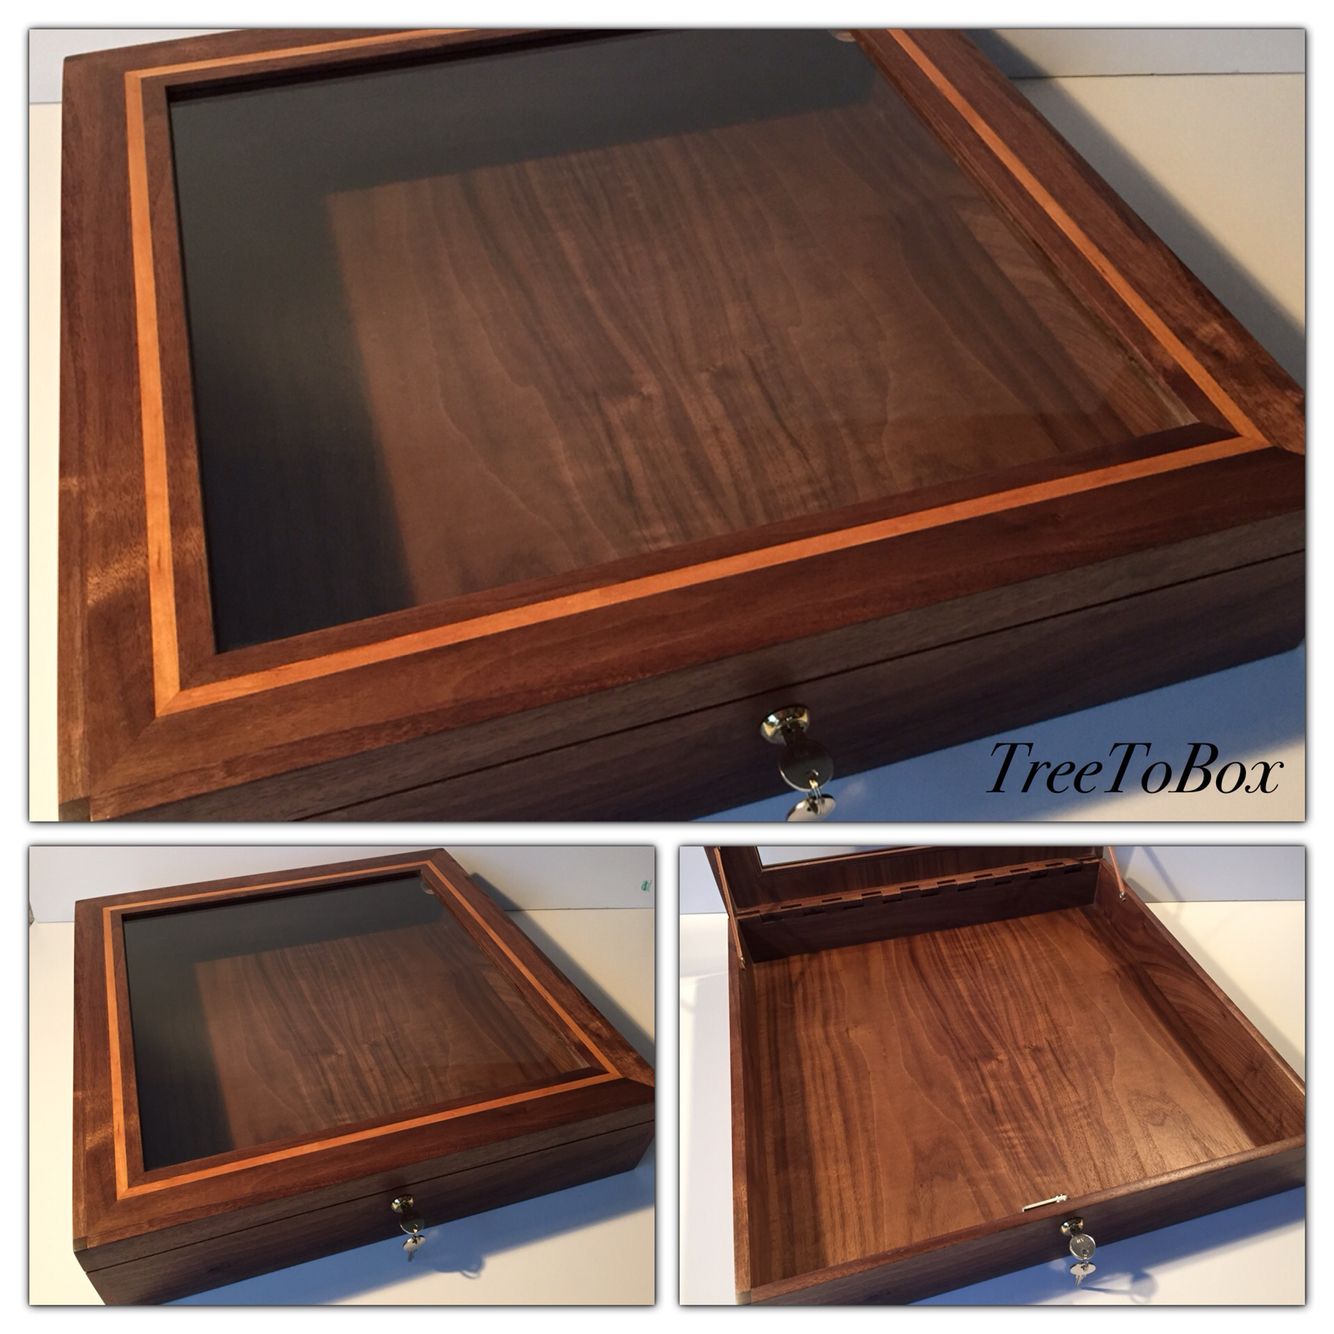 Handmade Custom Wooden Display Boxes by Wood Designs by 